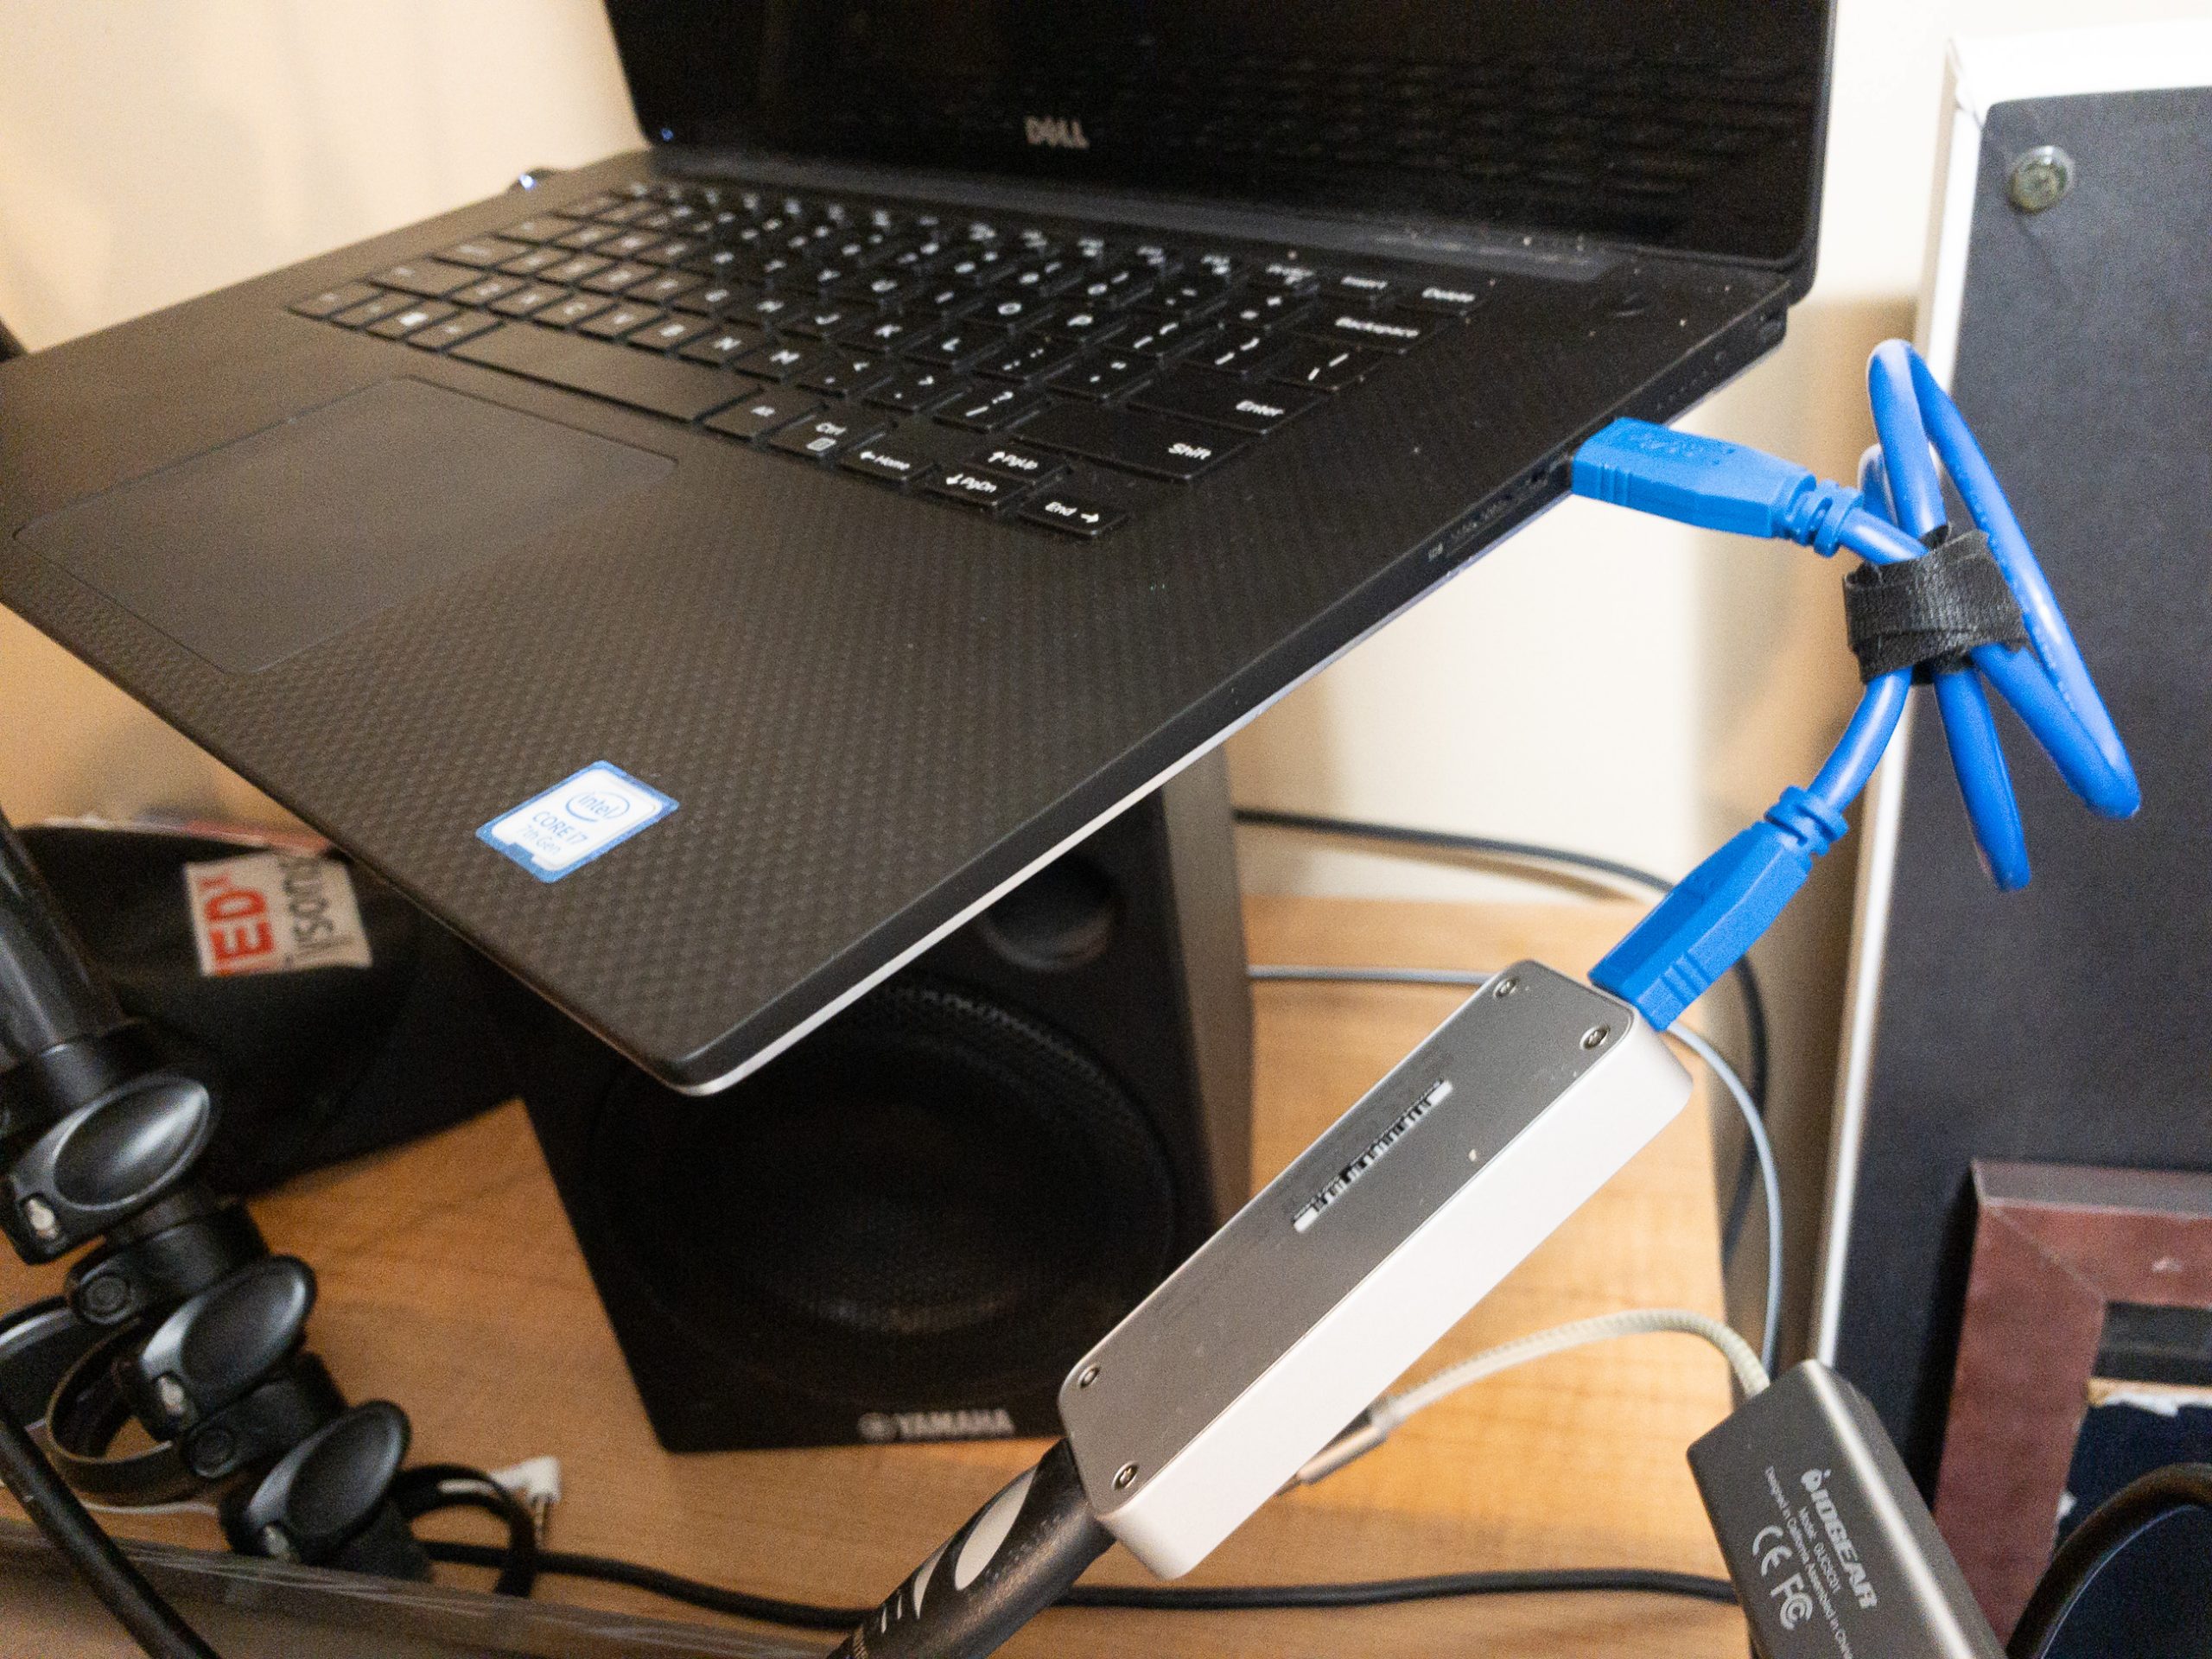 HDMI to USB capture card